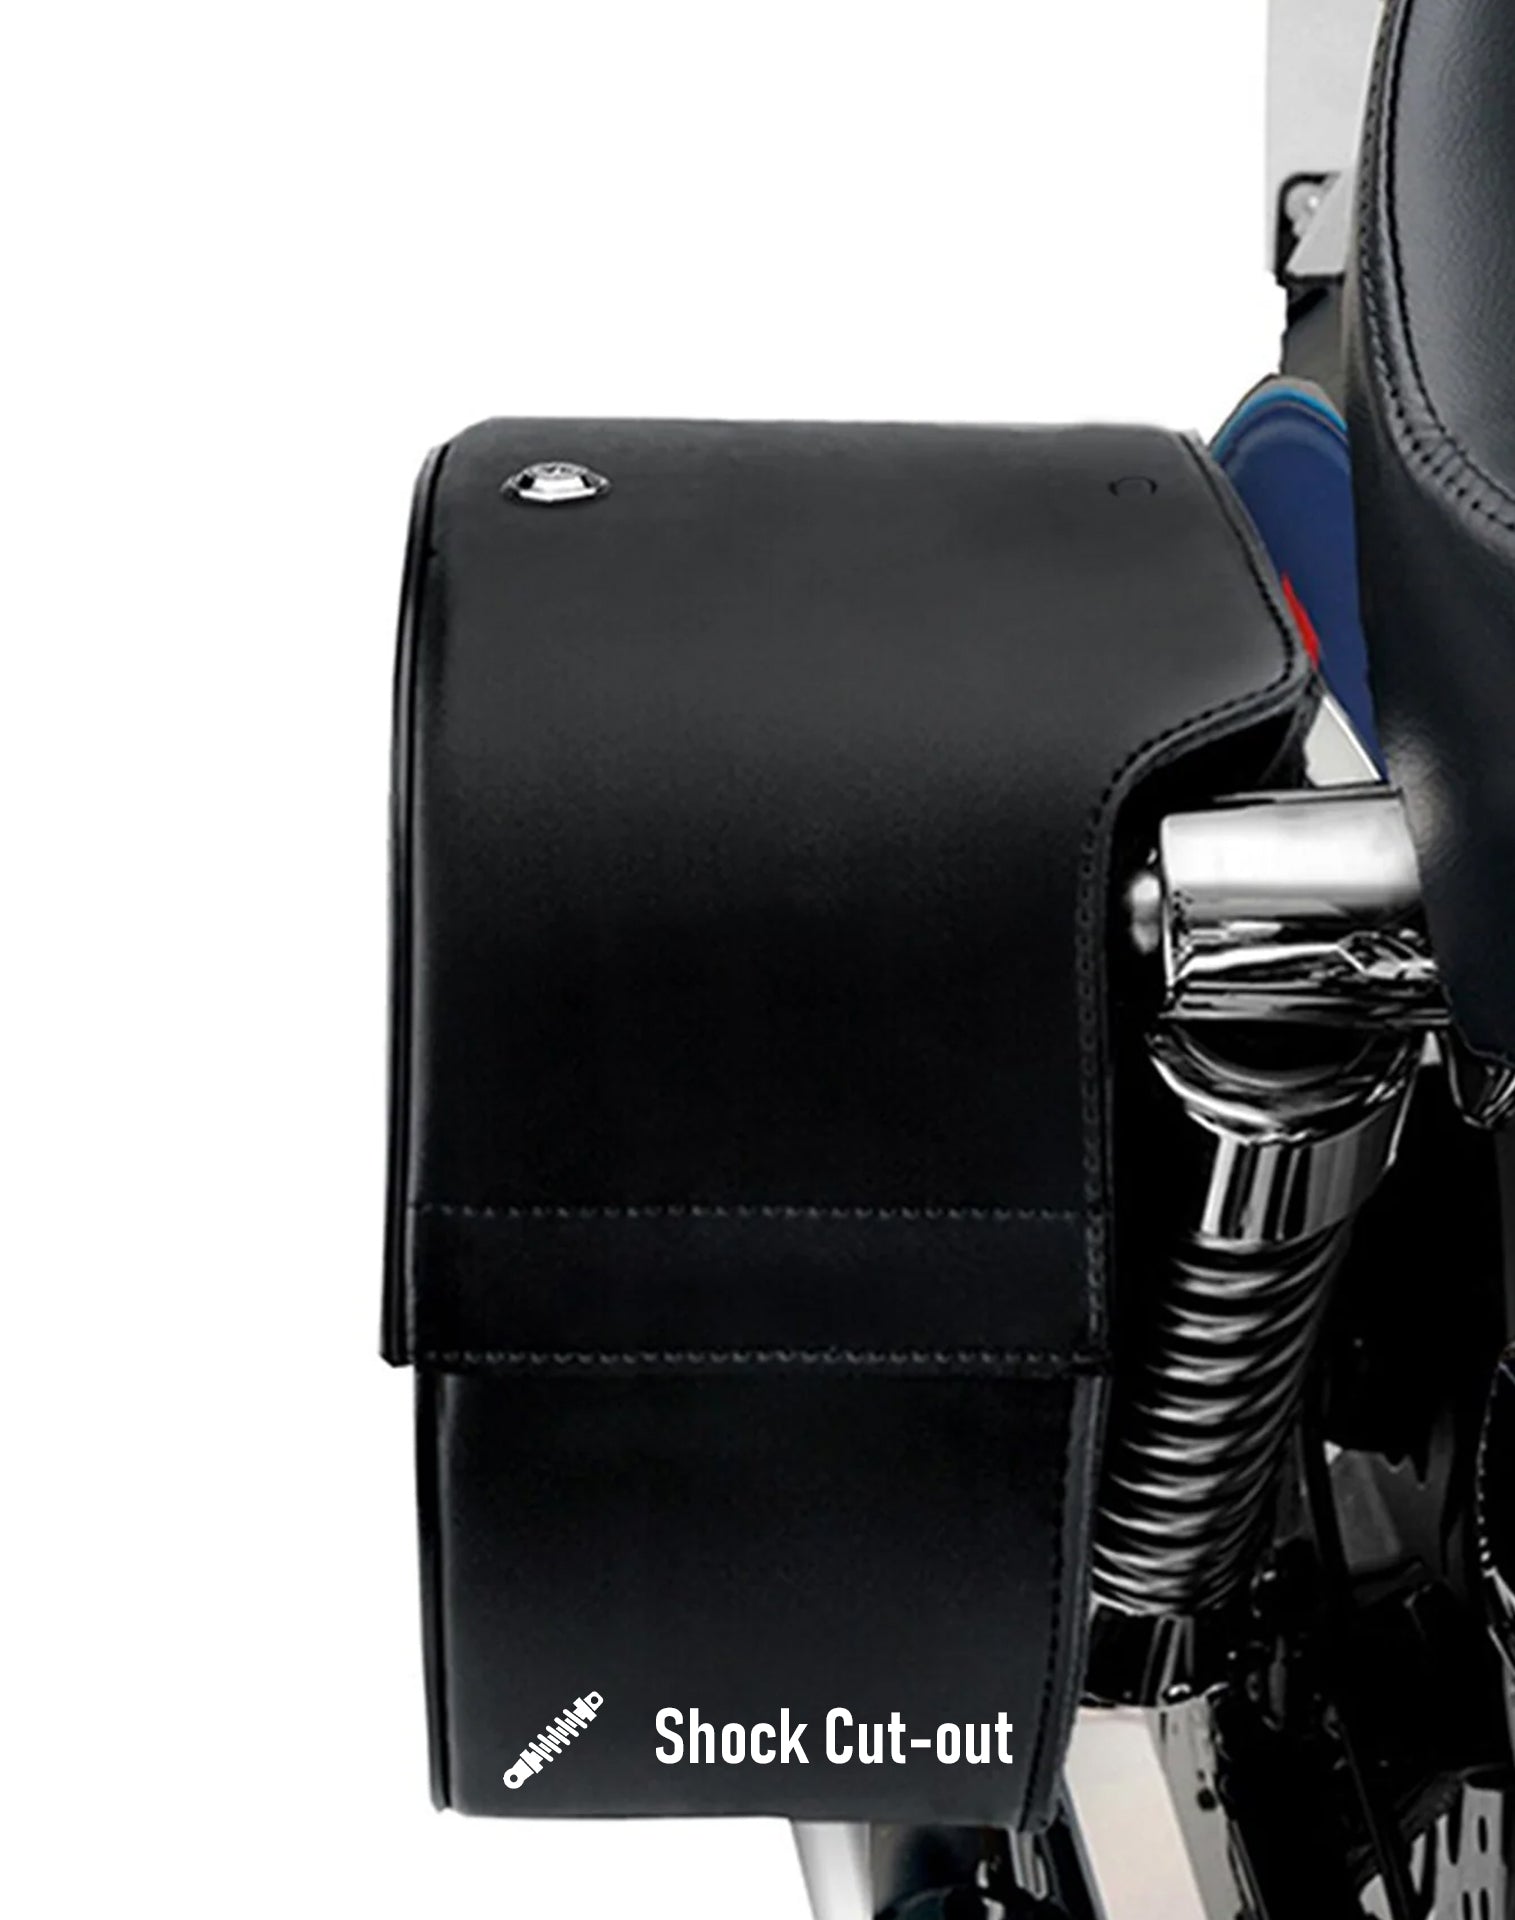 Viking Warrior Large Triumph Rocket Iii Touring Shock Cut Out Leather Motorcycle Saddlebags Hard Shell Construction